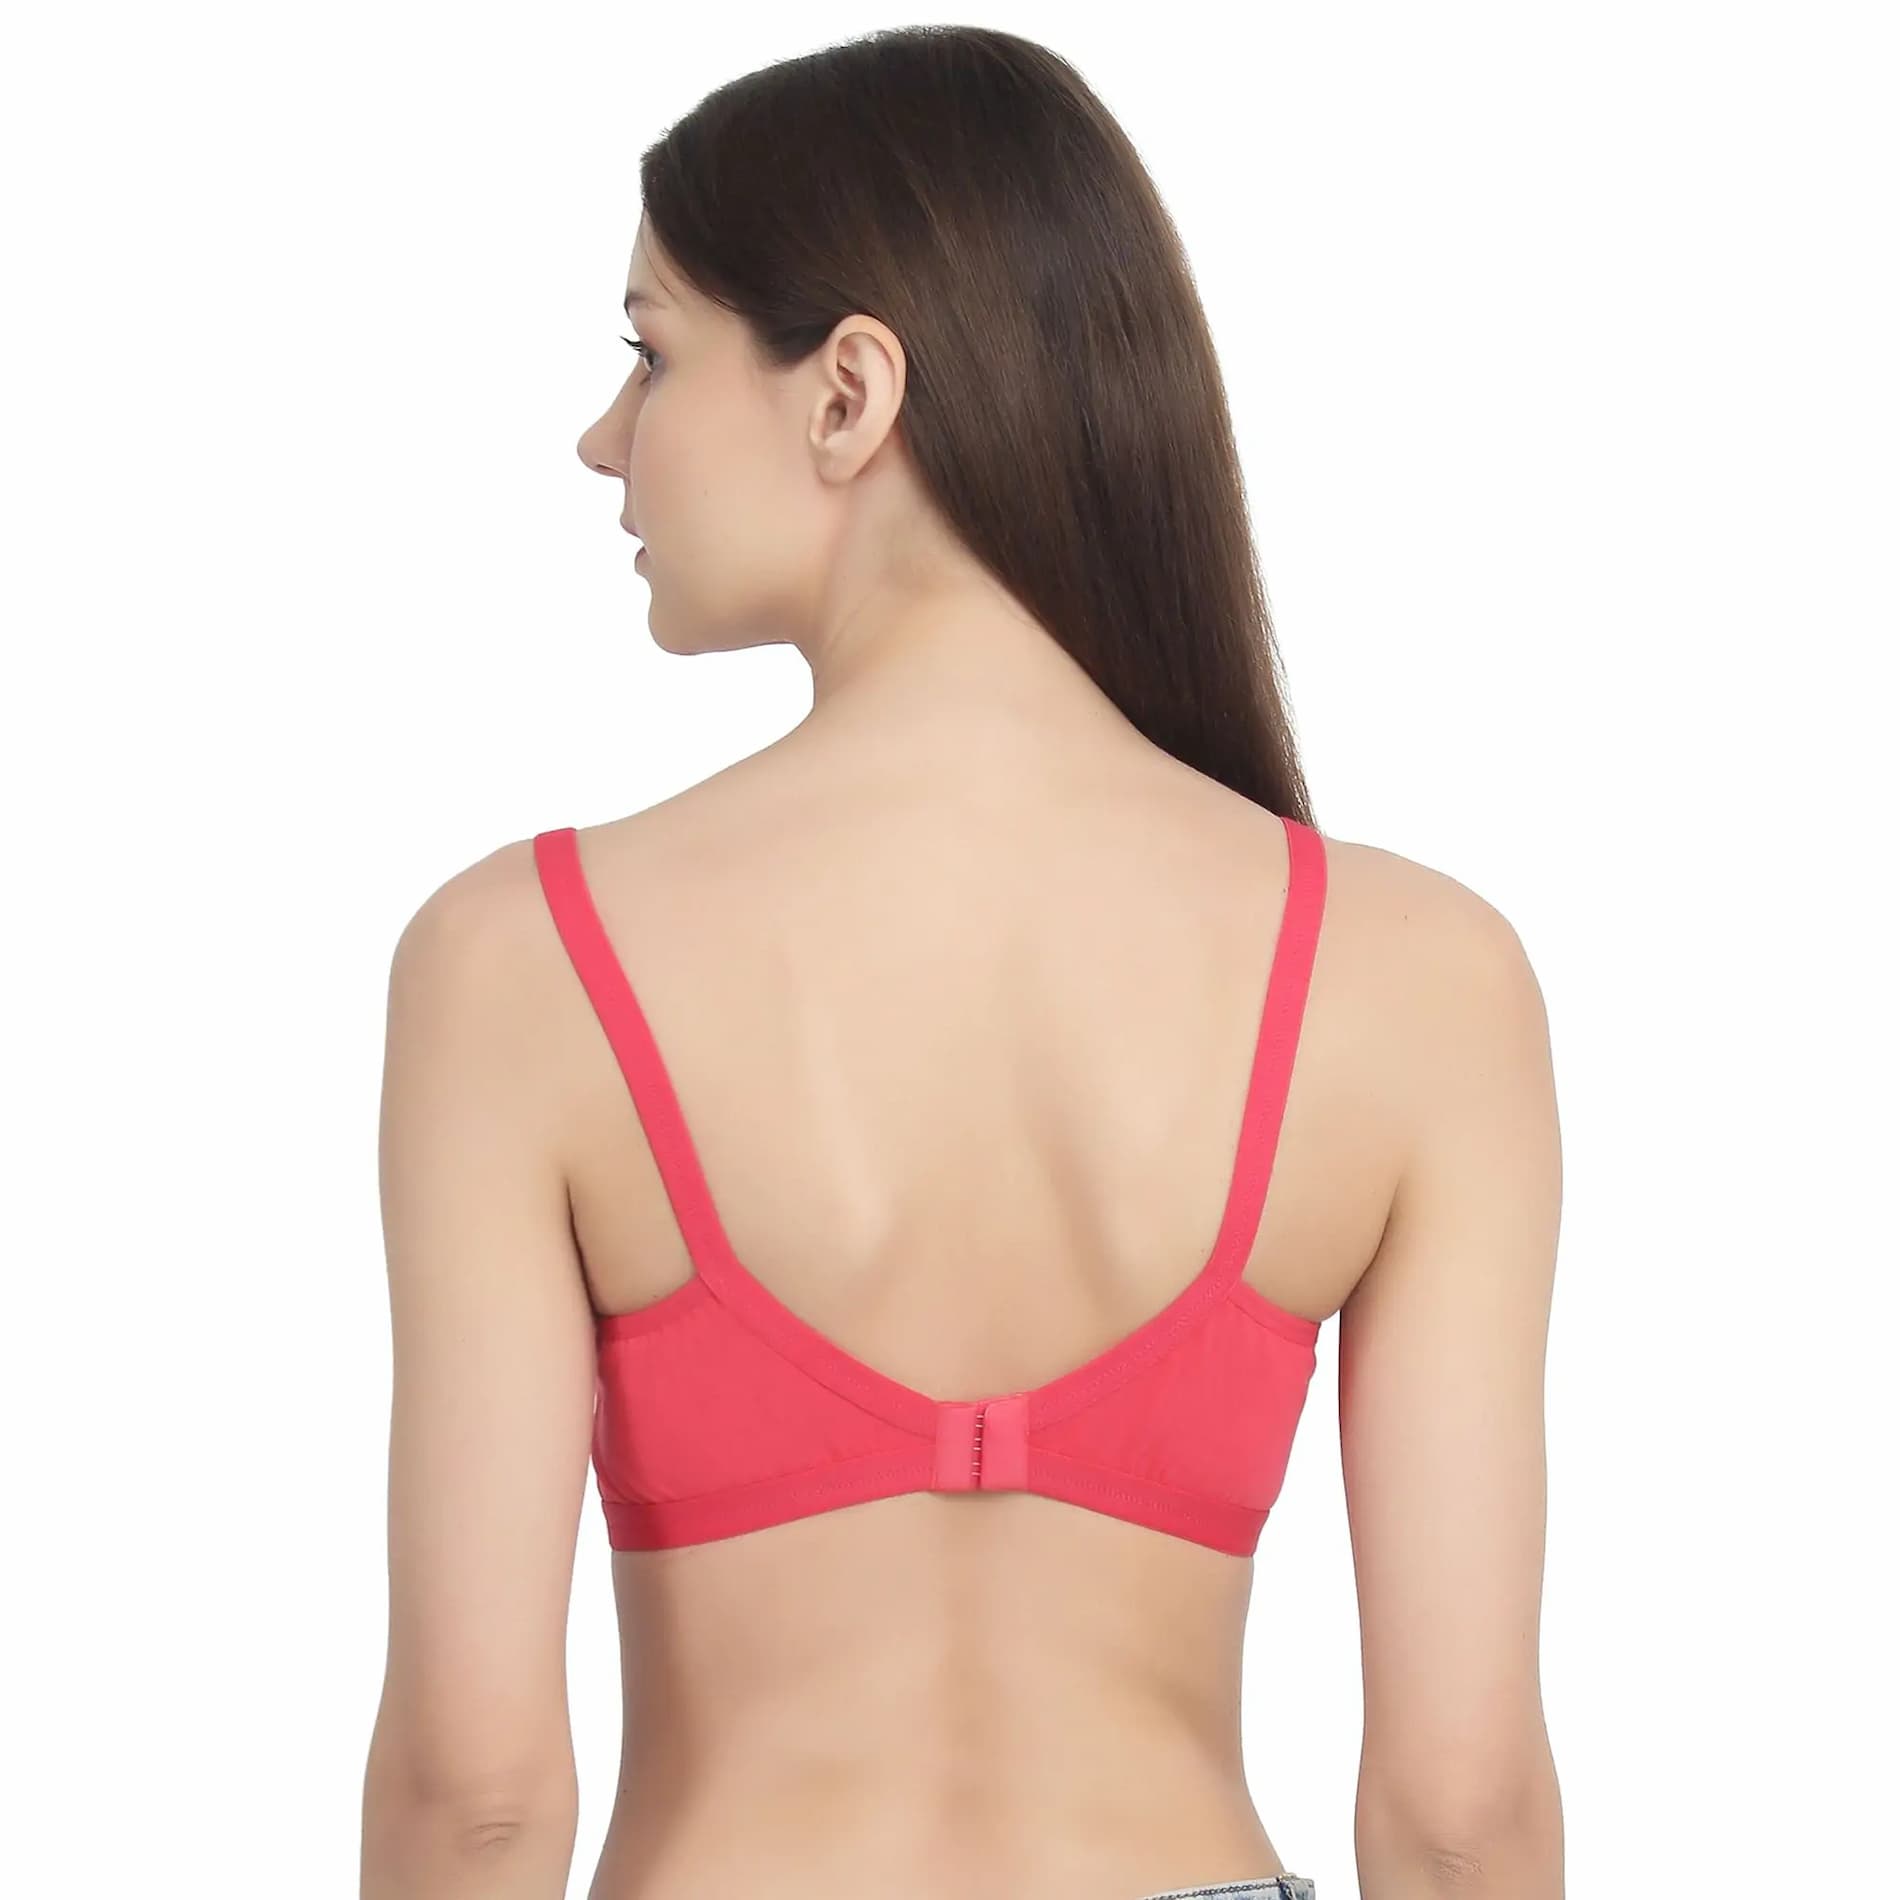 Mylo Maternity/Nursing Moulded Spacer Cup Bra with free bra extender - Coral 42B